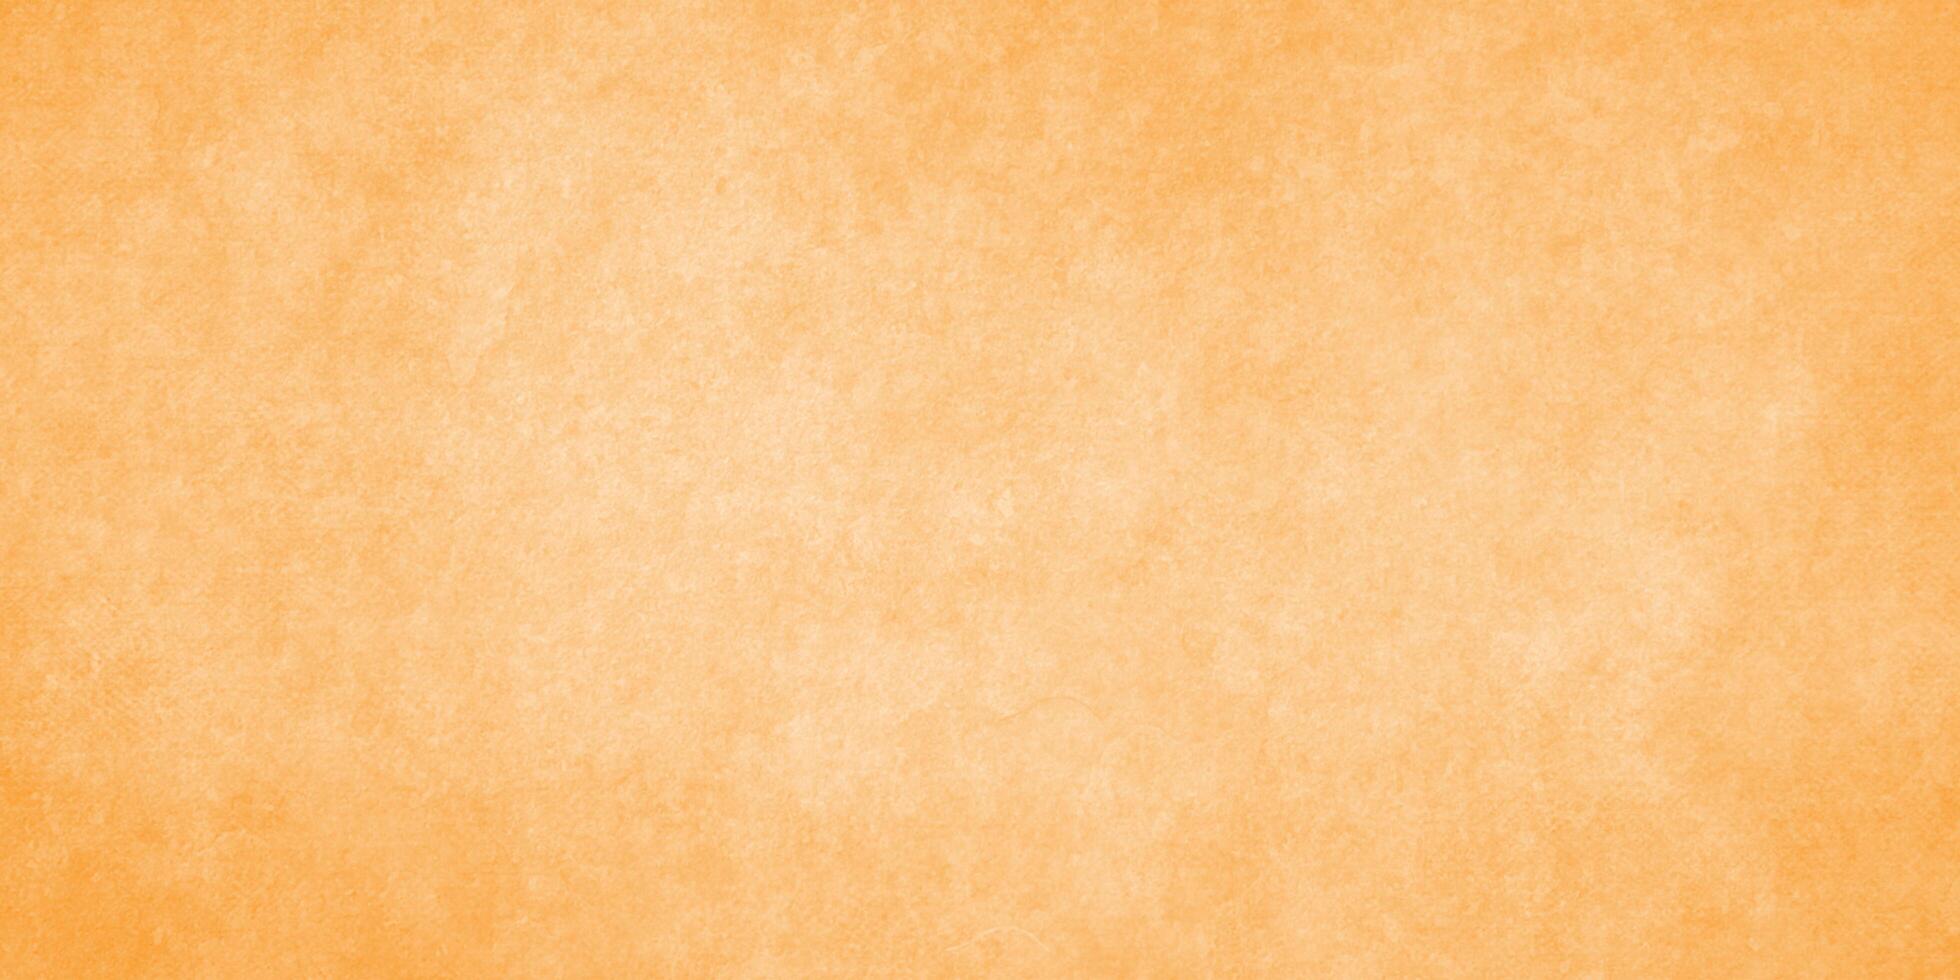 grunge and empty smooth Old stained paper background, grainy and spotted painted watercolor background on paper texture. photo